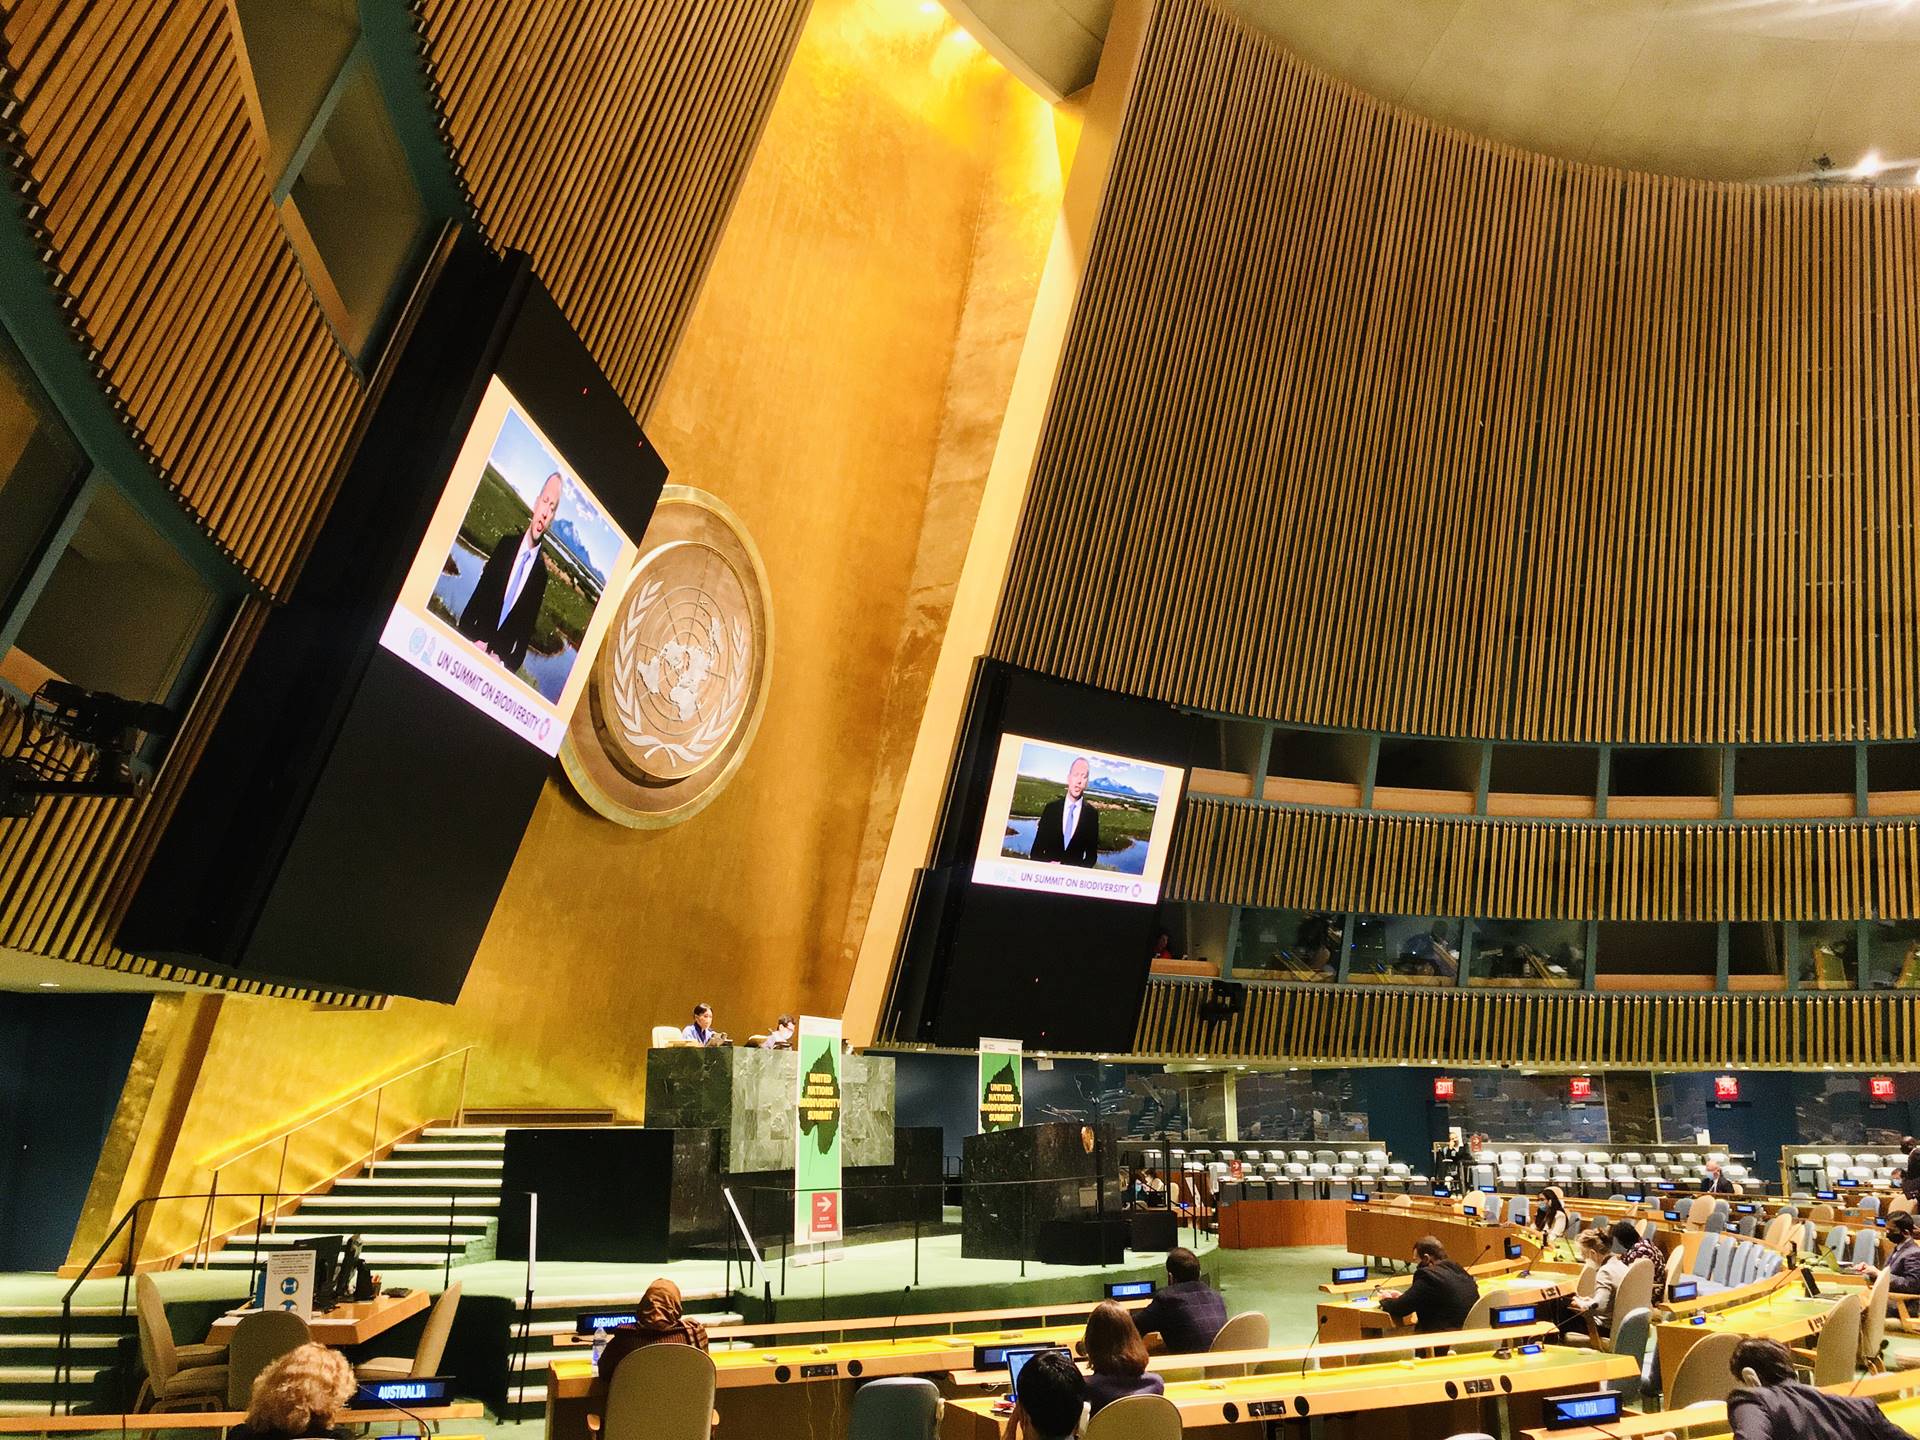 The Ministers video address was played in the main room of the General Assembly.  - mynd